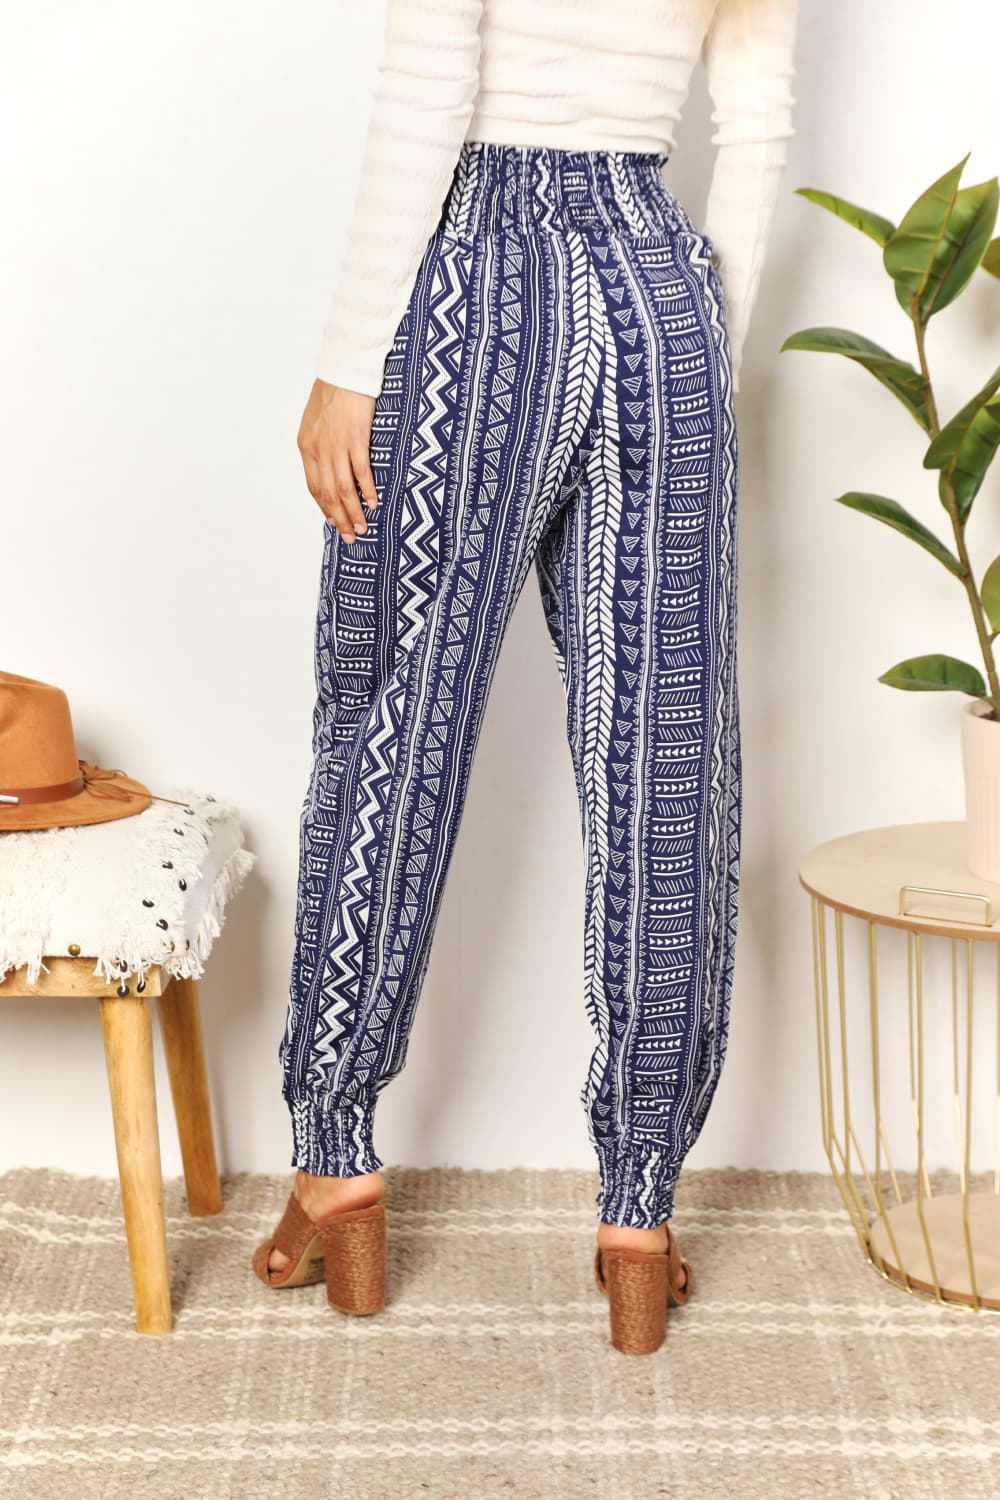 Double Take Geometric Print Tassel High-Rise Pants - The Teal Antler Boutique